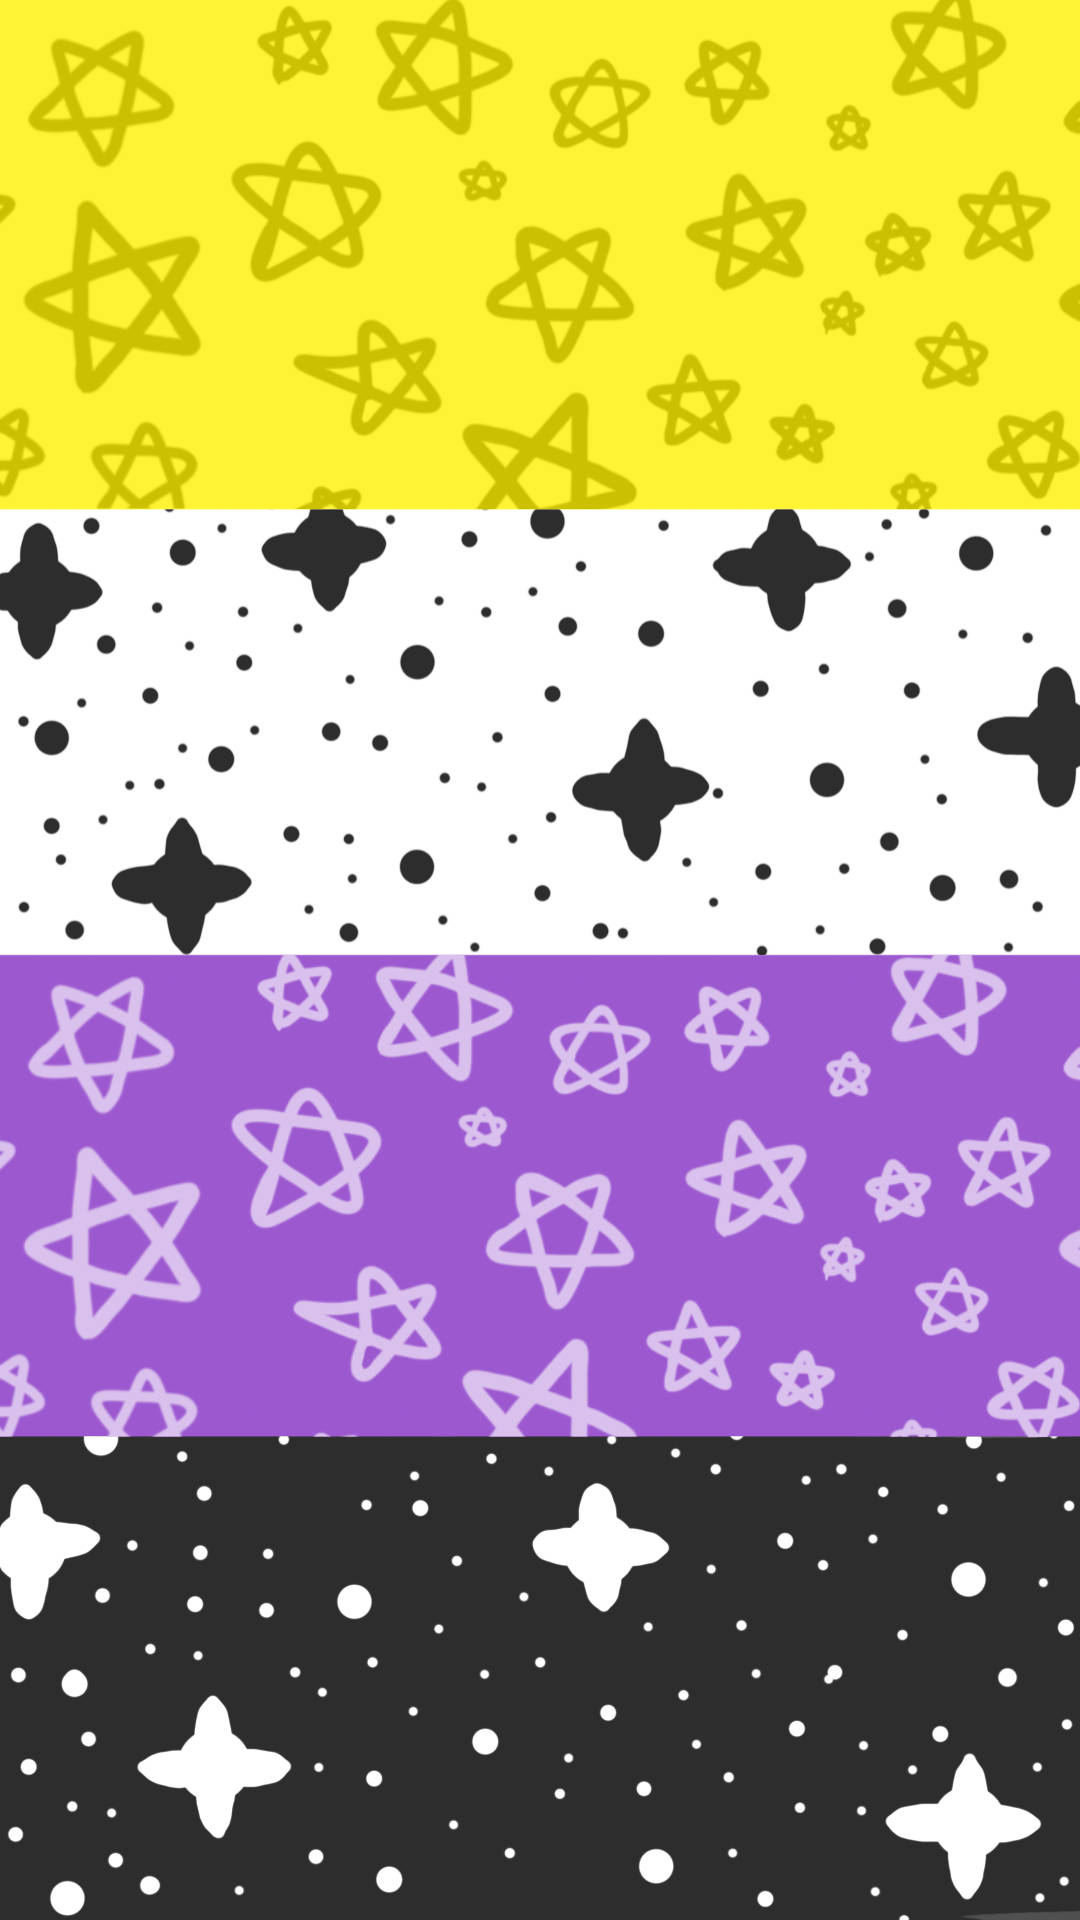 Four Different Patterns With Stars On Them Wallpaper